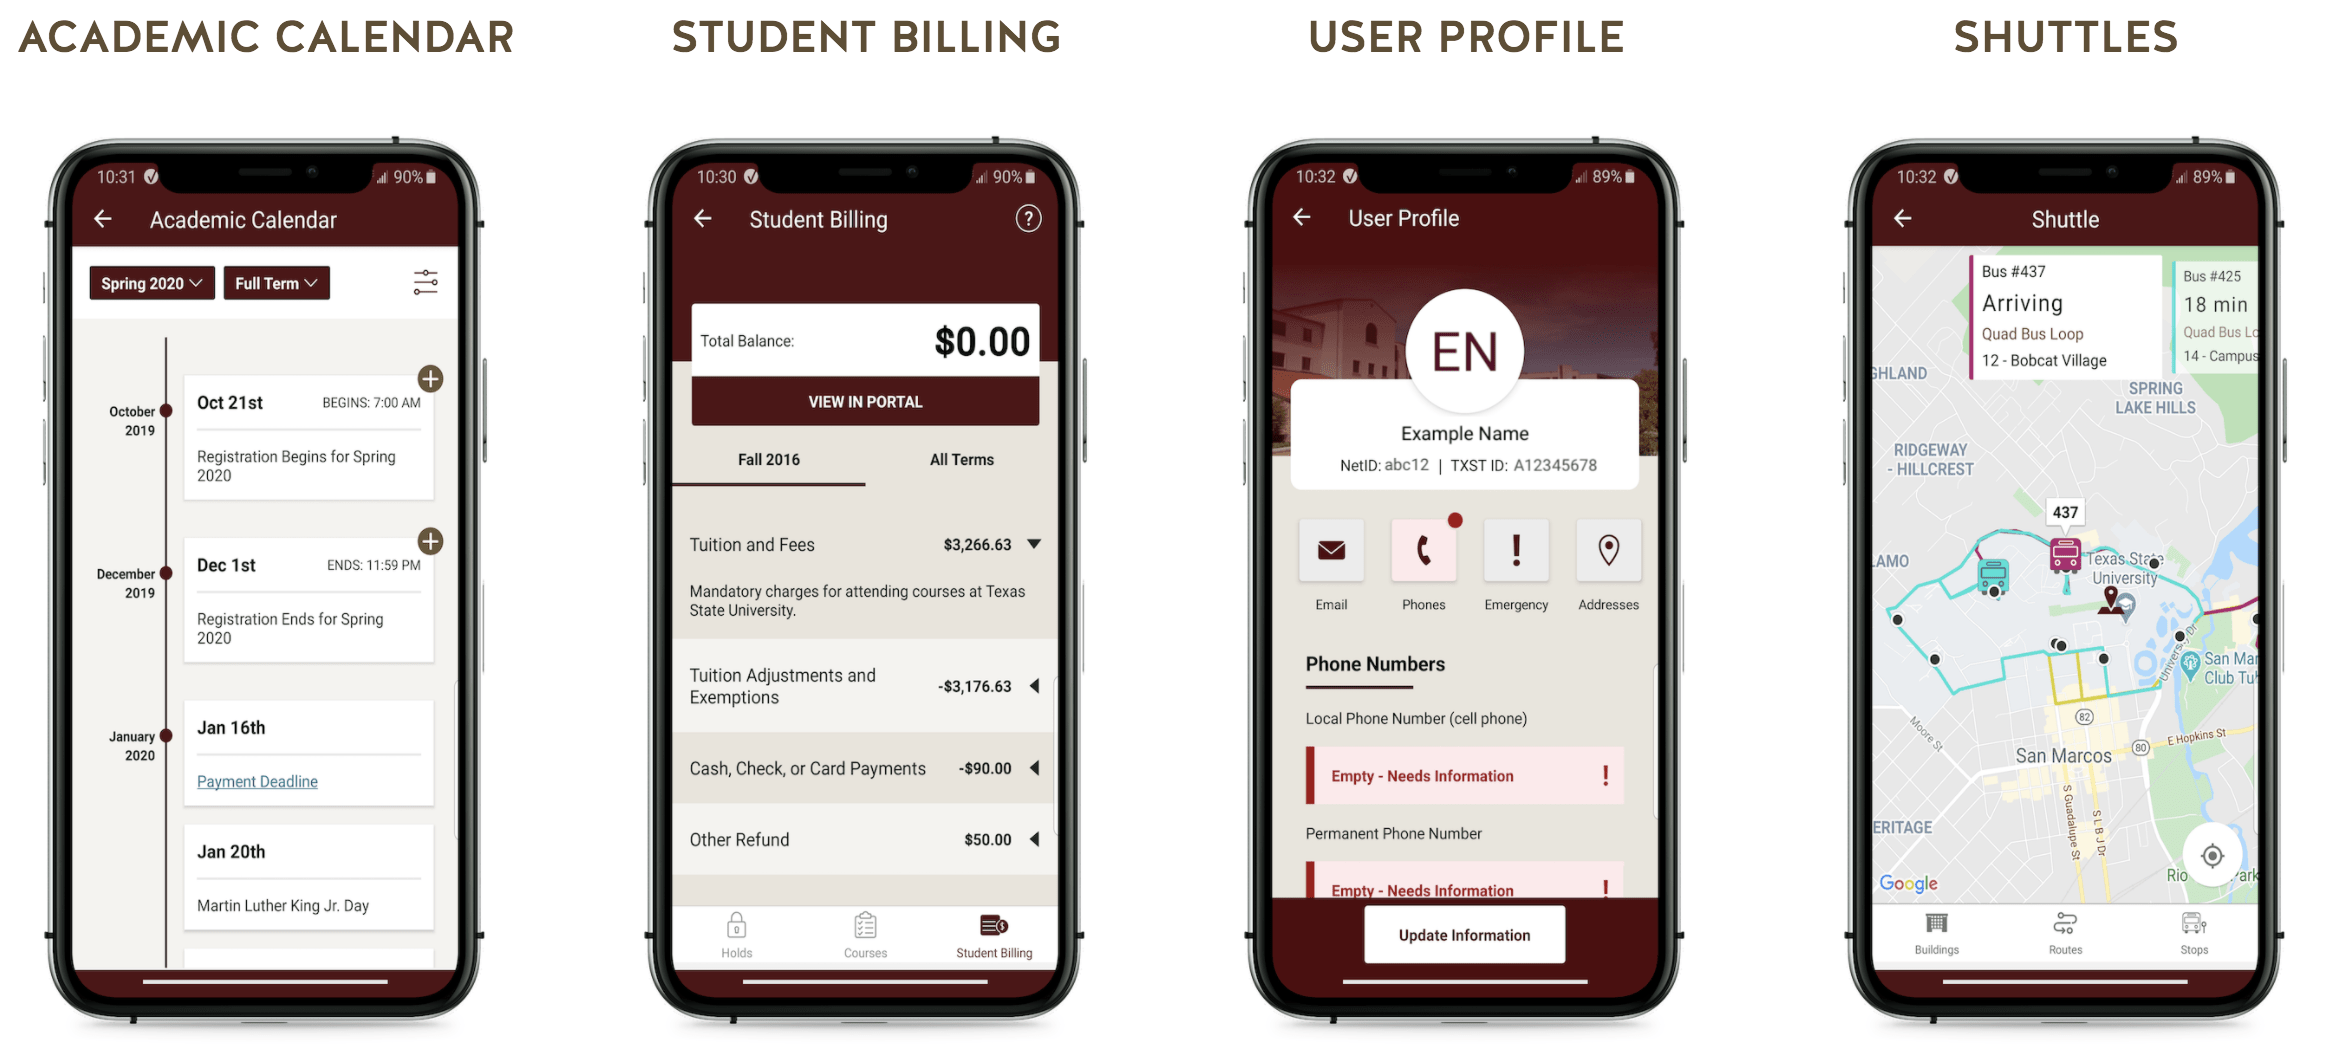 Different features of TXST Mobile shown on mobile devices.